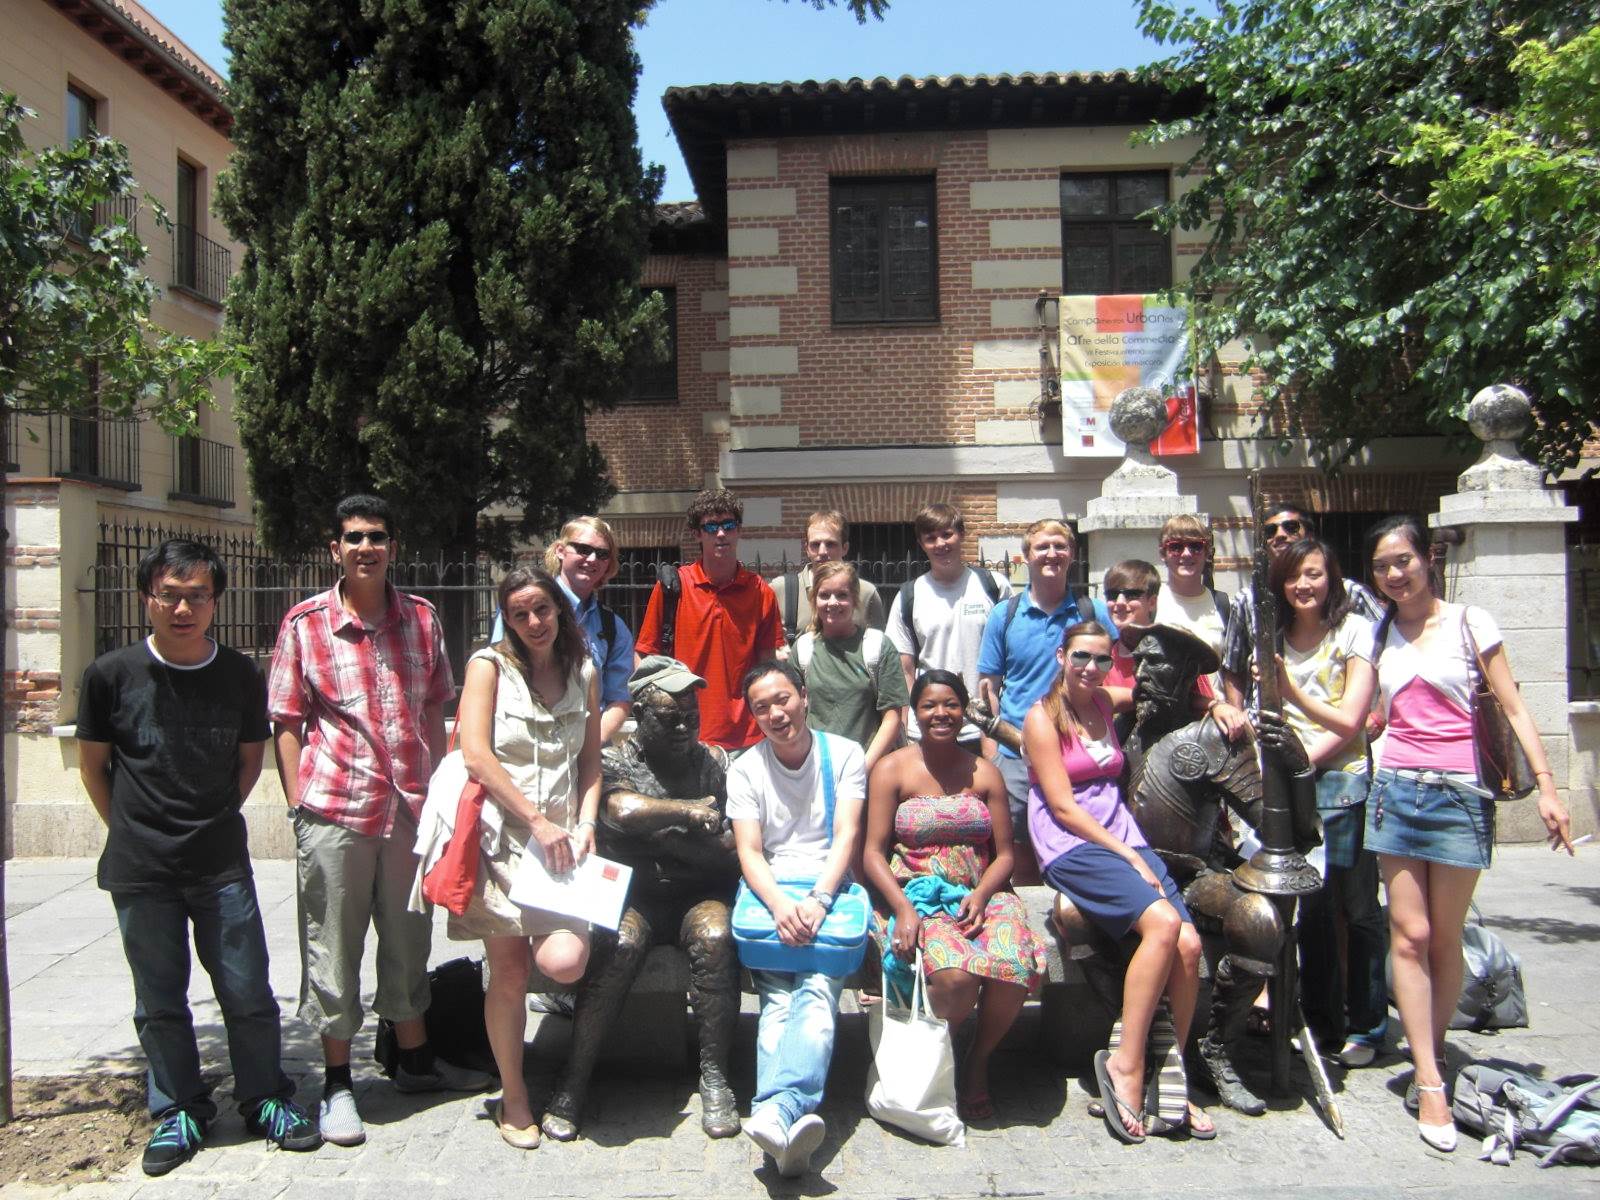 Visit to the birthplace of Cervantes